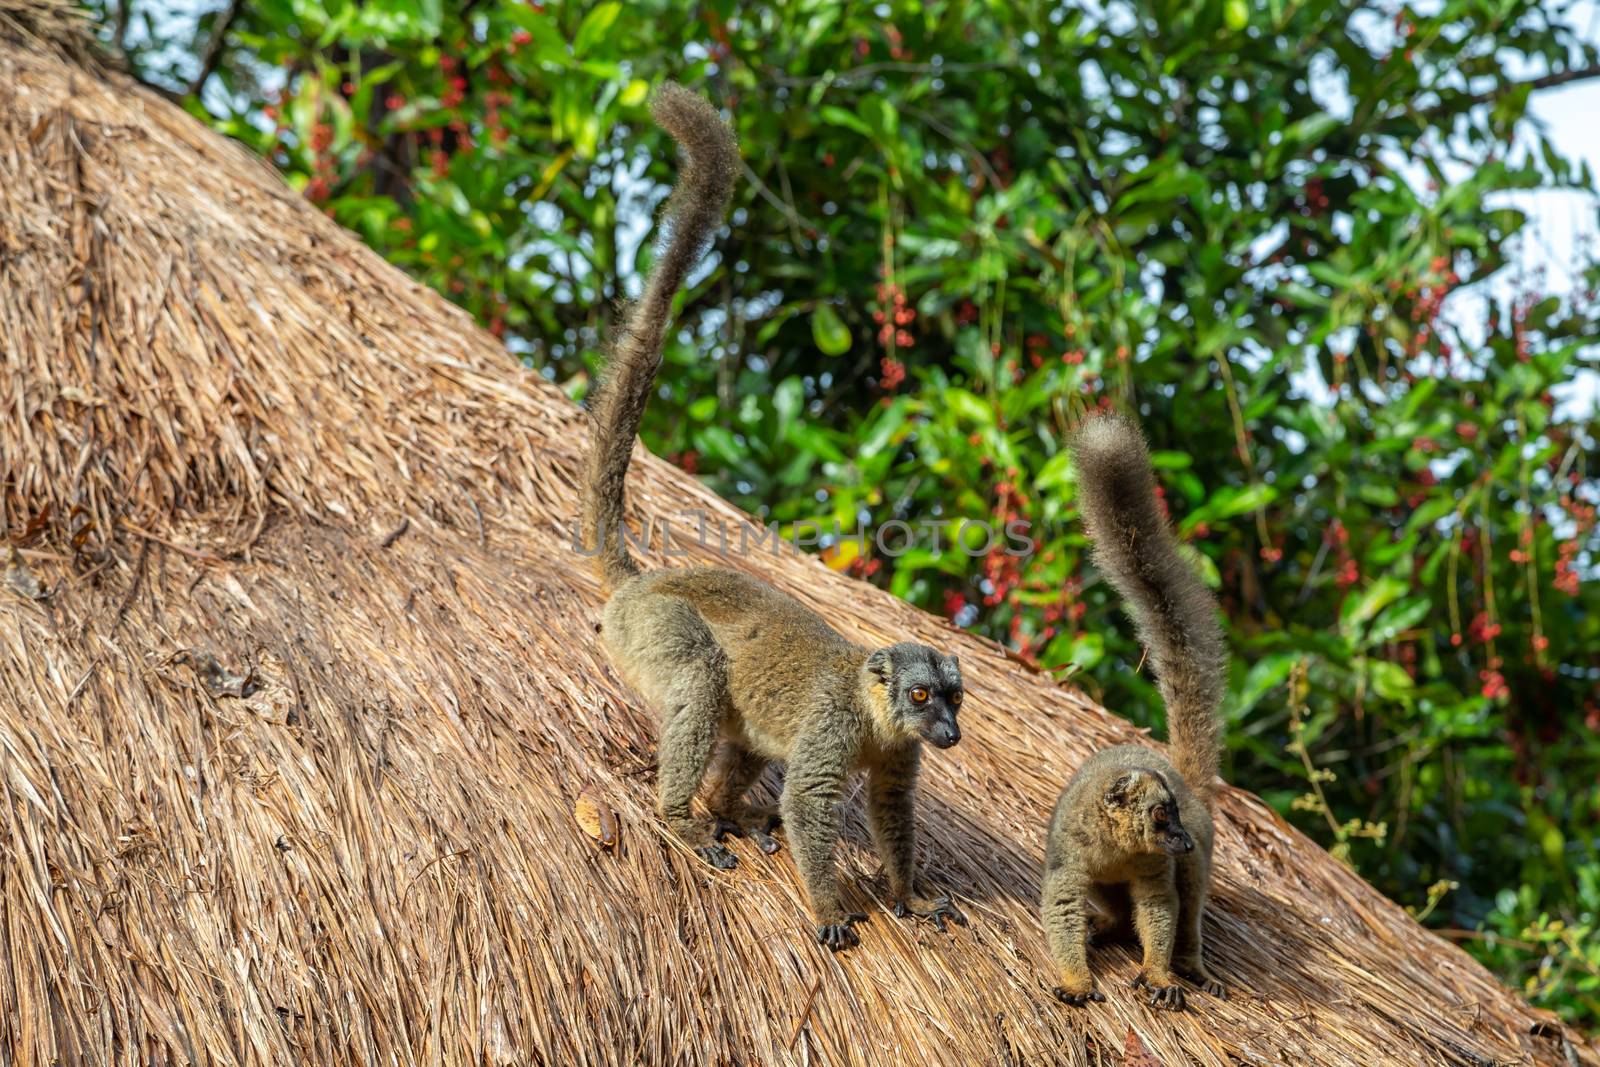 A Two lemurs play on the thatched roof of a house